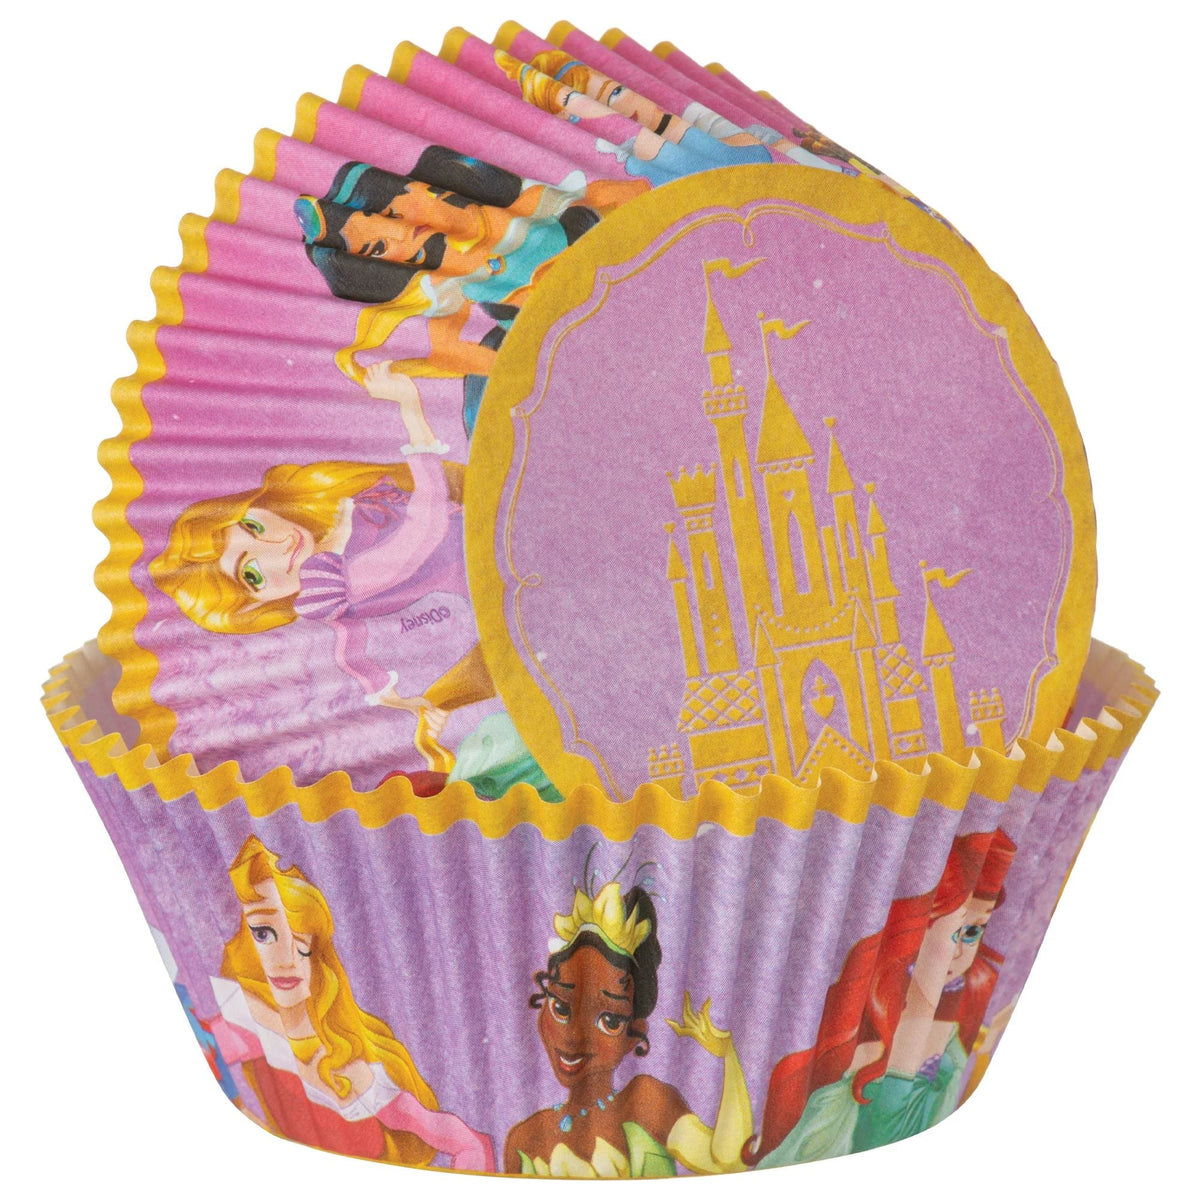 AMSCAN CA Cake Supplies Once Upon A Time Birthday Baking Cups, 48 Count 192937424421